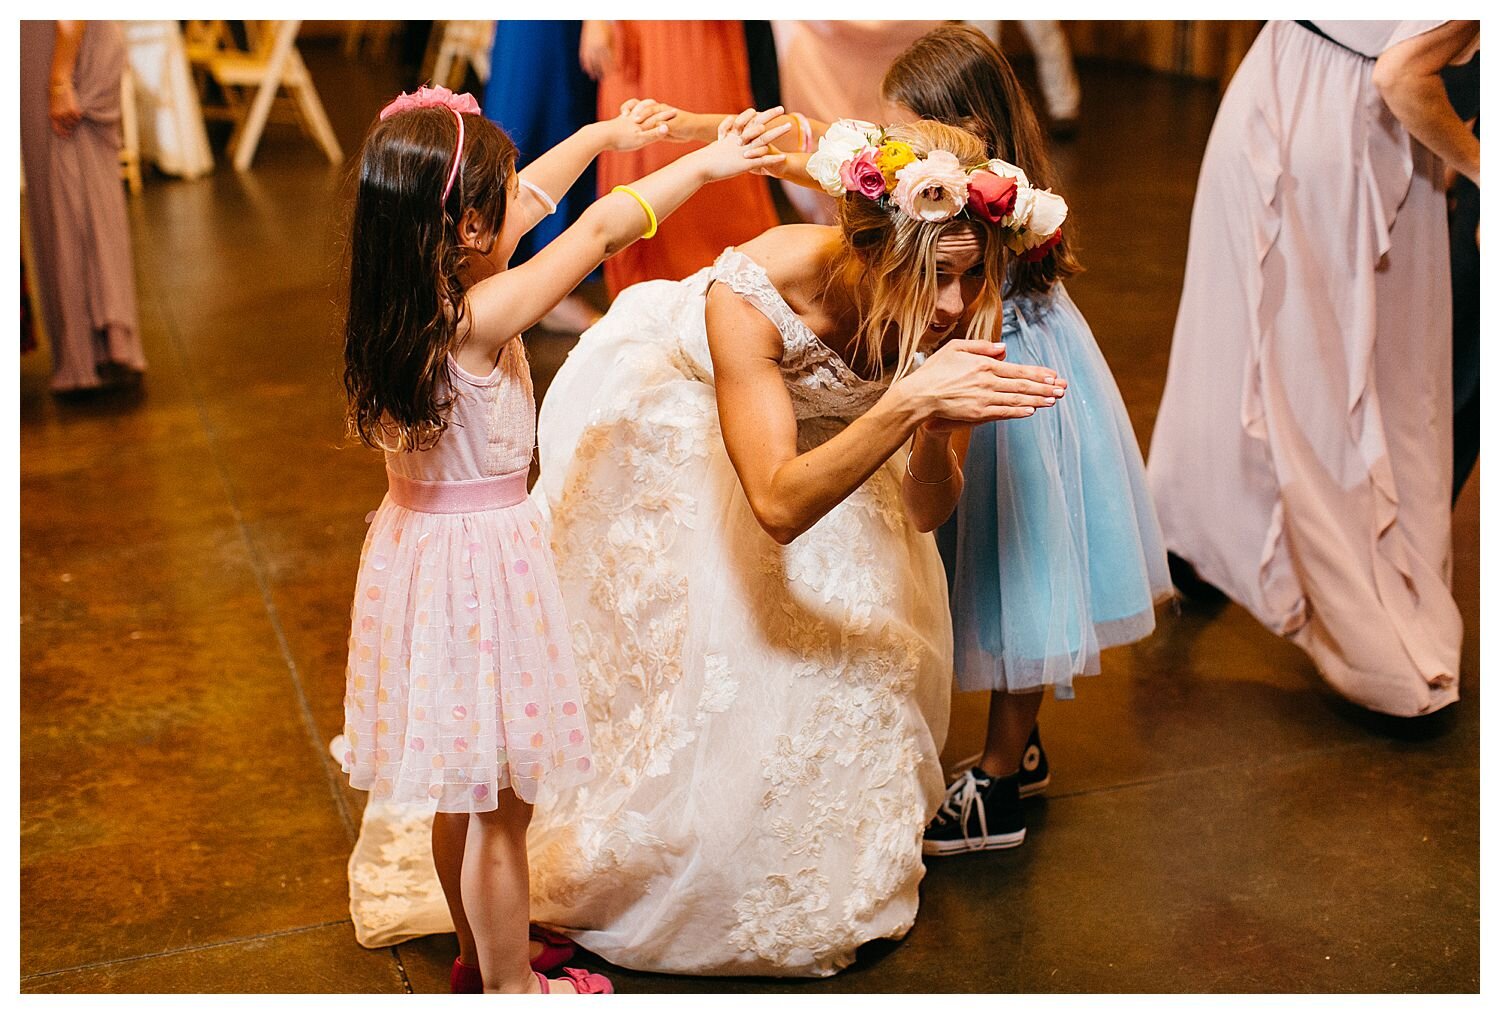 dancing with flower girl